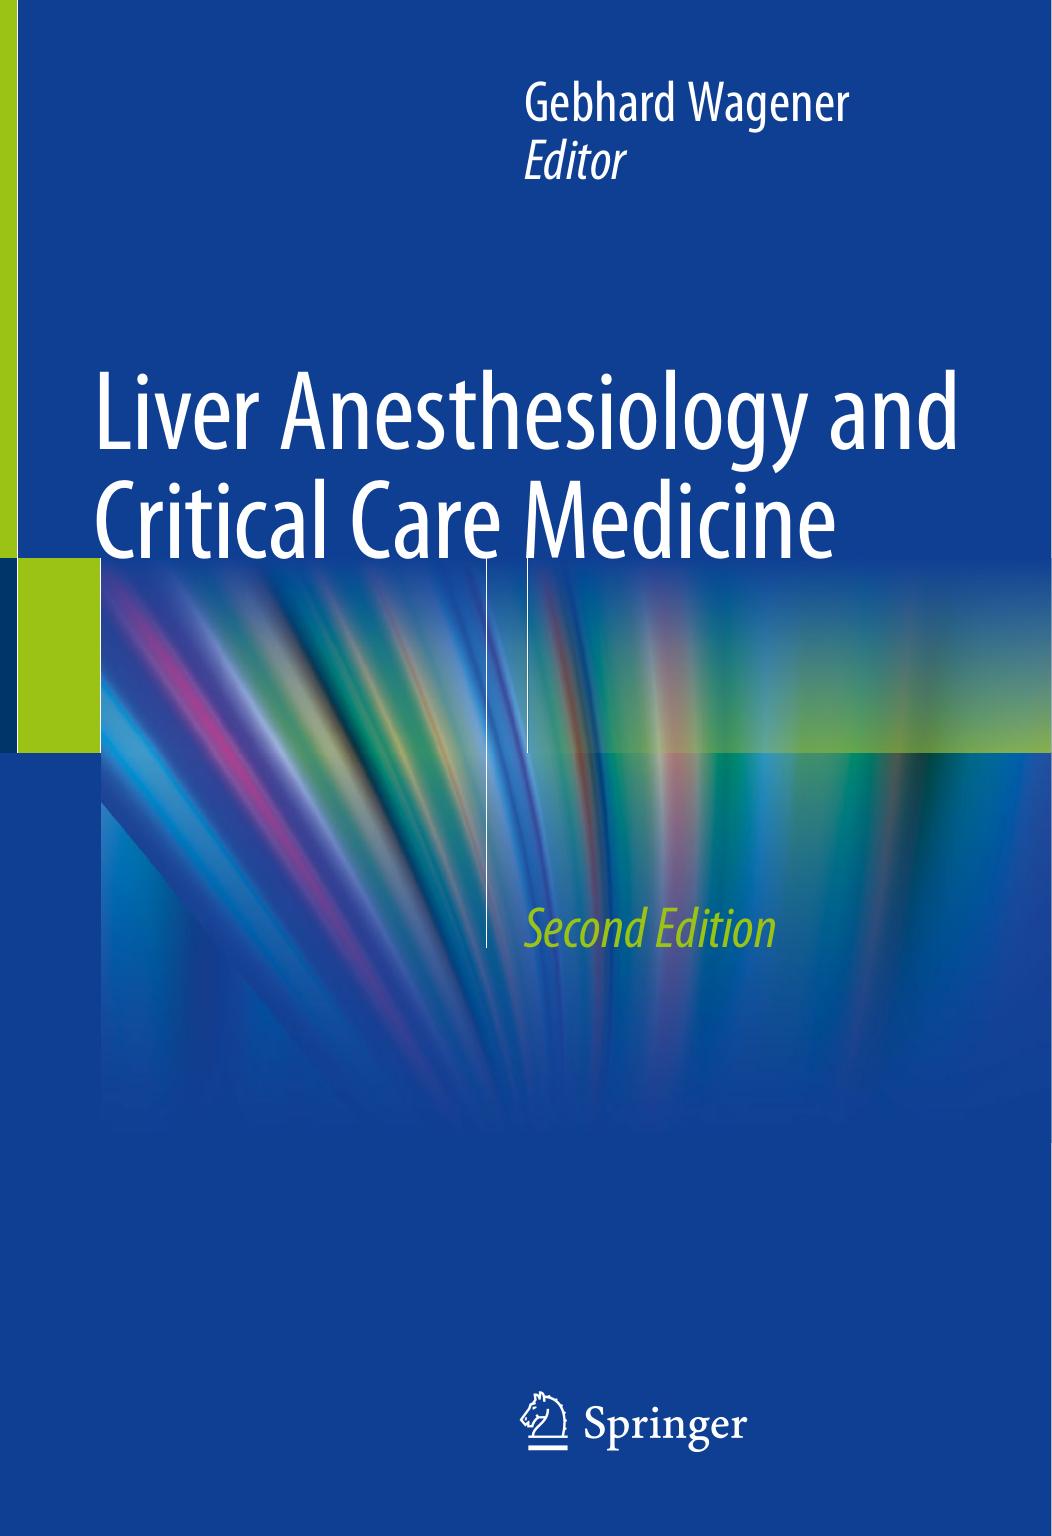 Liver Anesthesiology and Critical Care Medicine by Gebhard Wagener